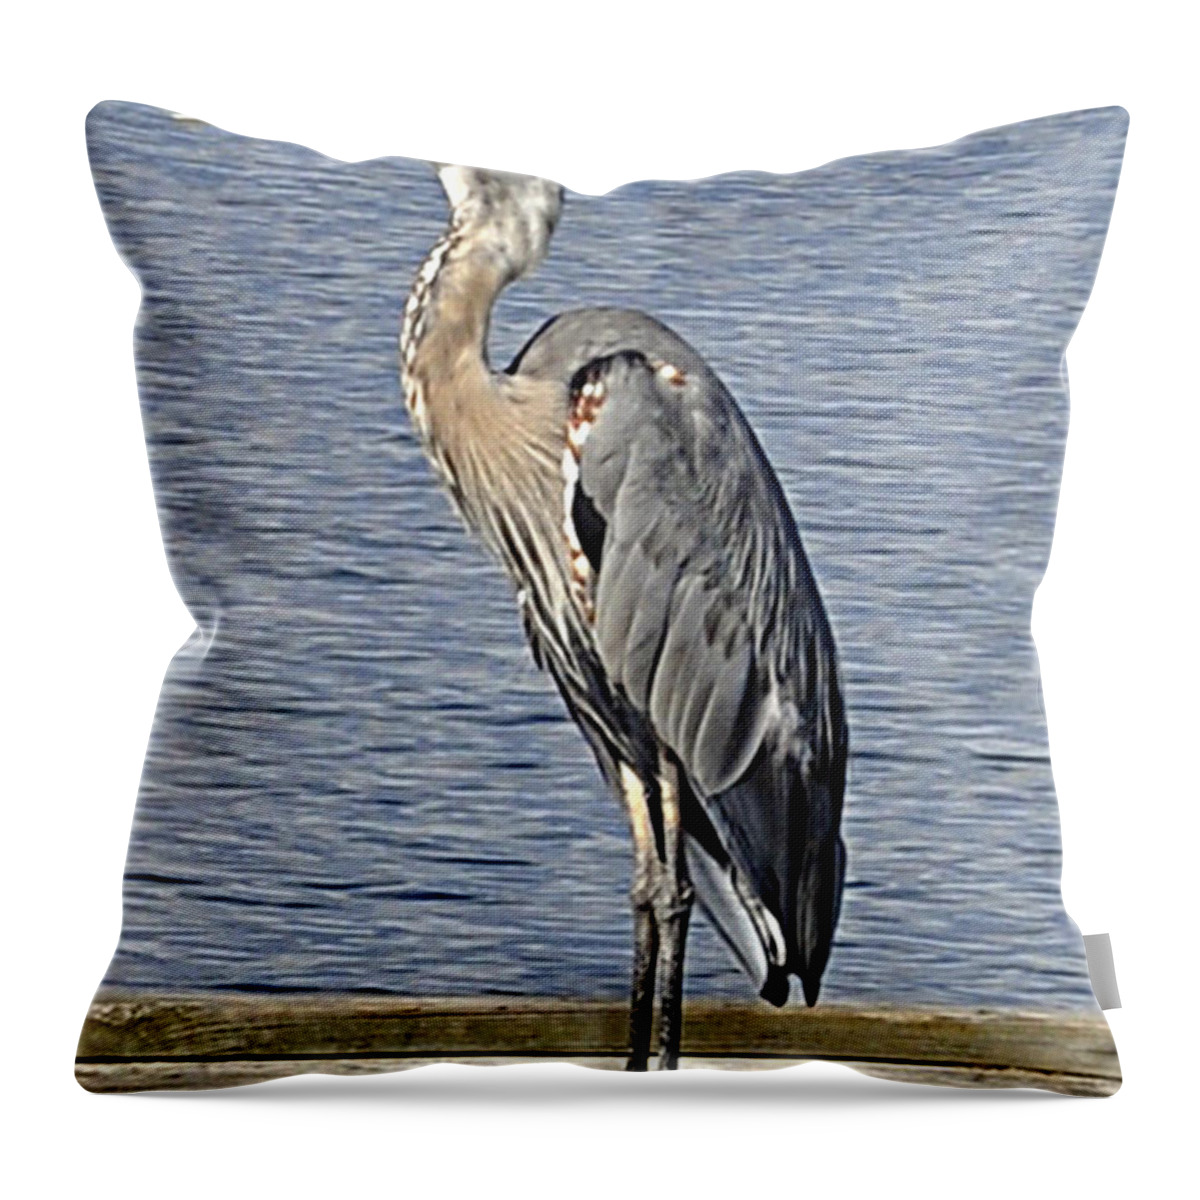 Great Blue Heron Throw Pillow featuring the photograph The Great Blue Heron Photo by Verana Stark